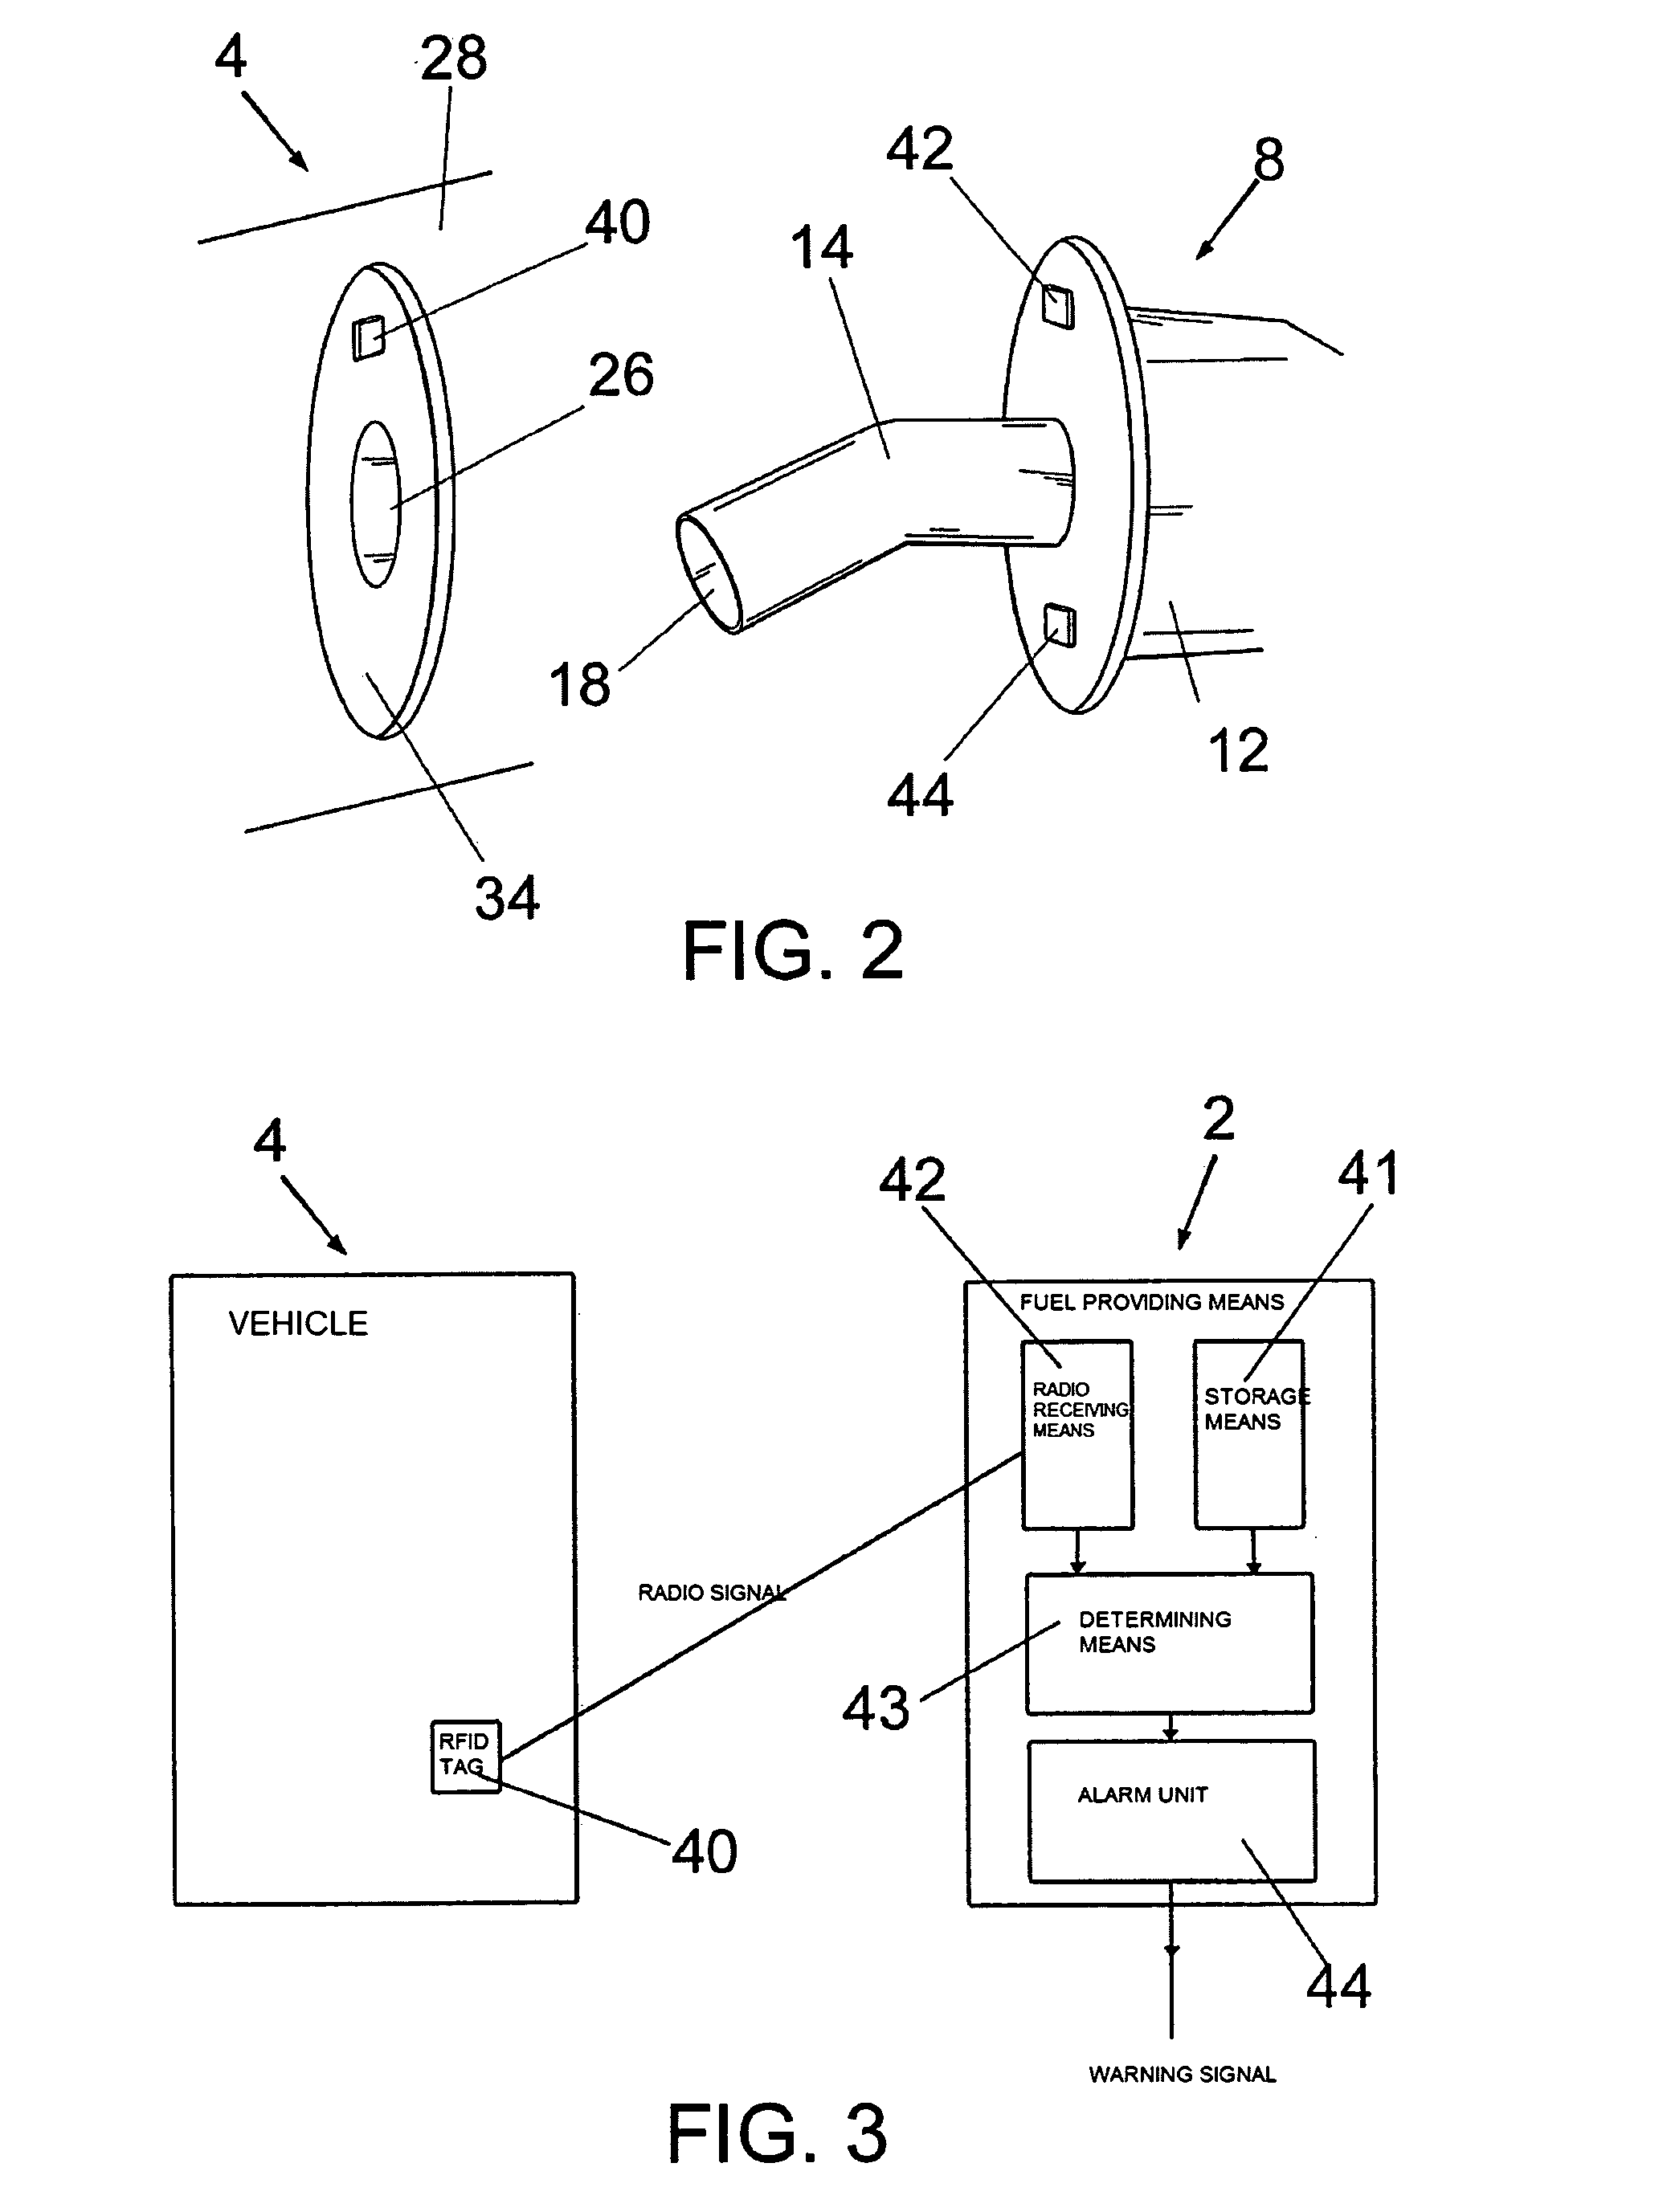 Apparatus and Method for Transferring Data Between a Fuel Providing Means and a Vehicle for the Prevention of Misfuelling